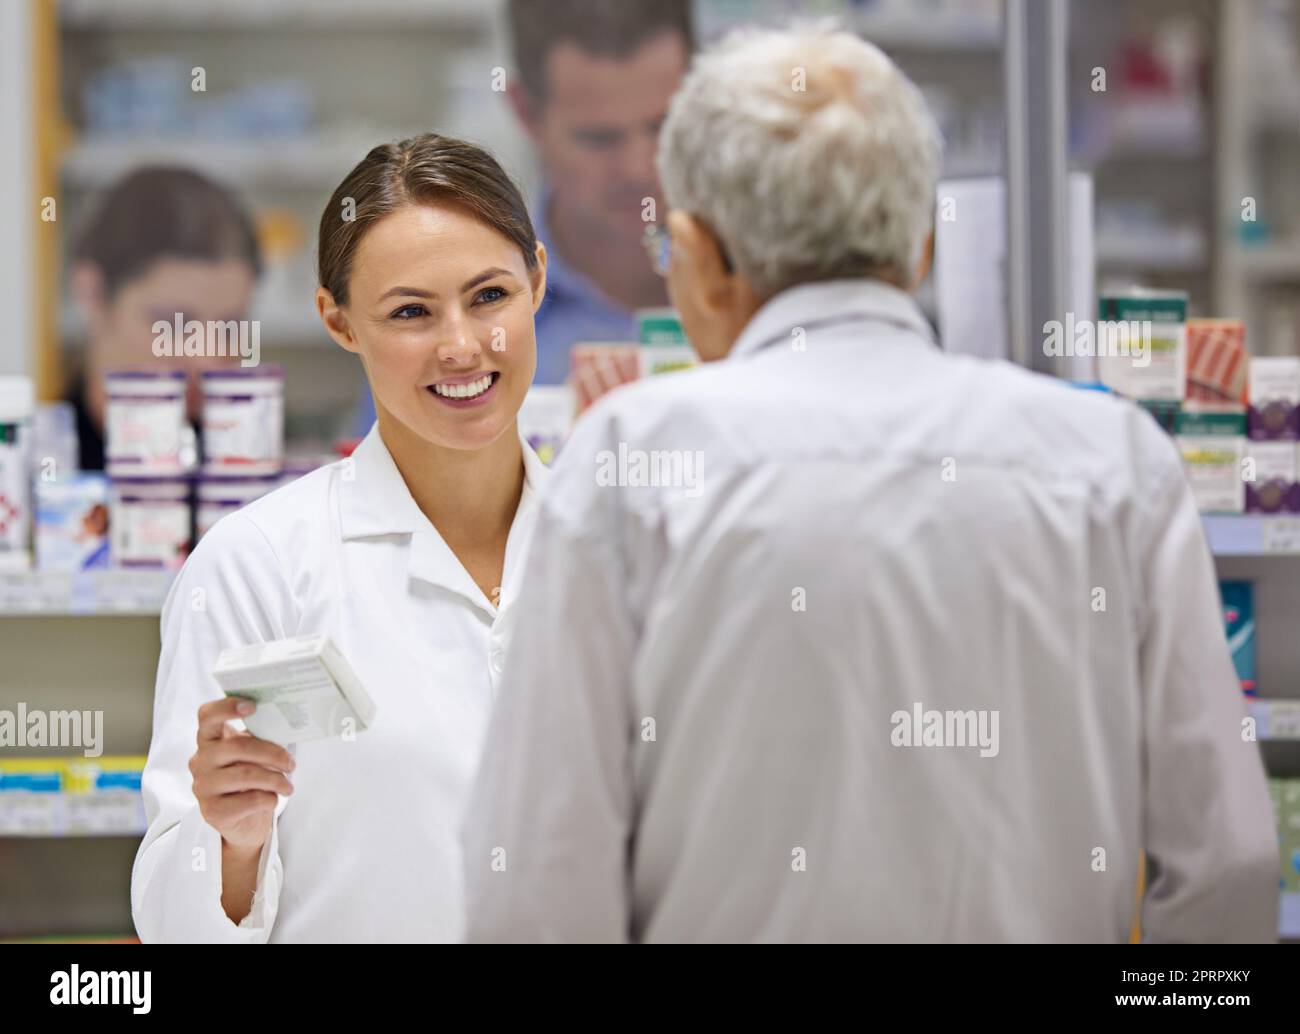 Offering friendly advice to clients. a young pharmacist helping an elderly customer. Stock Photo